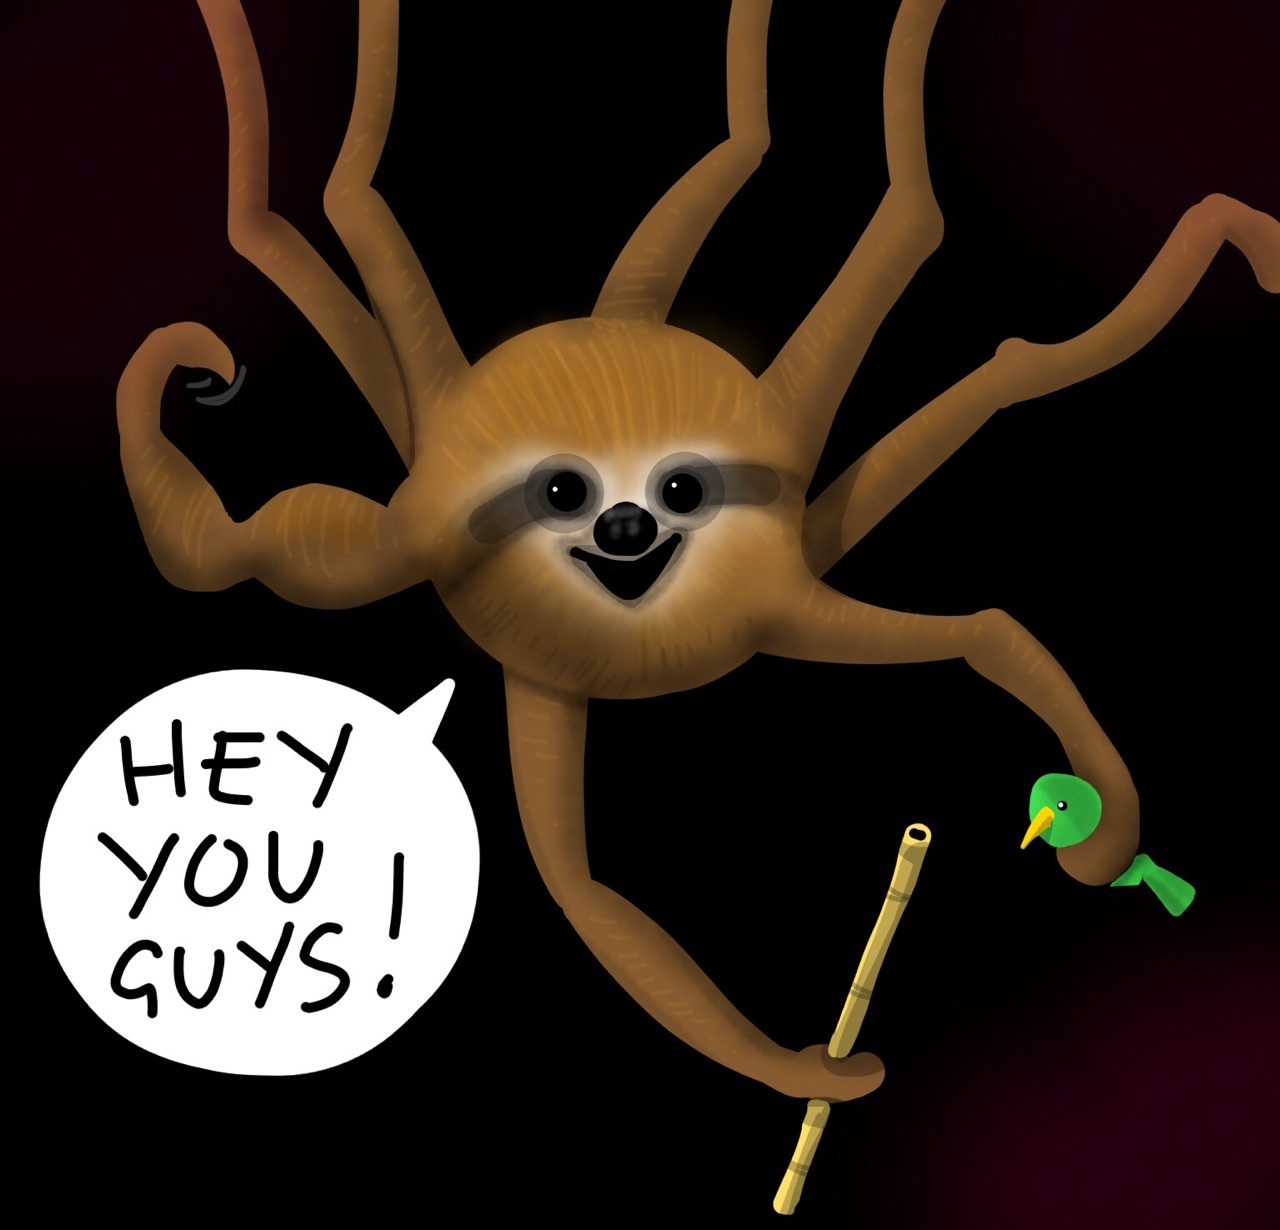 OctoslothOctosloth just wants to be your friend. He will try precisely eight times before instantly falling into a 12-week coma. On waking he may dream you are already friends and call you persistently from his mobile bamboo chat-stick. He is alerted to calls via his ‘ring-ring’ bird, Peter, who pecks his cheek every time someone gets in contact. Peter also acts as Octosloth’s confidante, personal shopper and antiques dealer, as it’s widely known Octosloth’s have a thing for 15th Century hope chests and mahogany sideboards. Octosloth’s smell JUST LIKE Sundays.